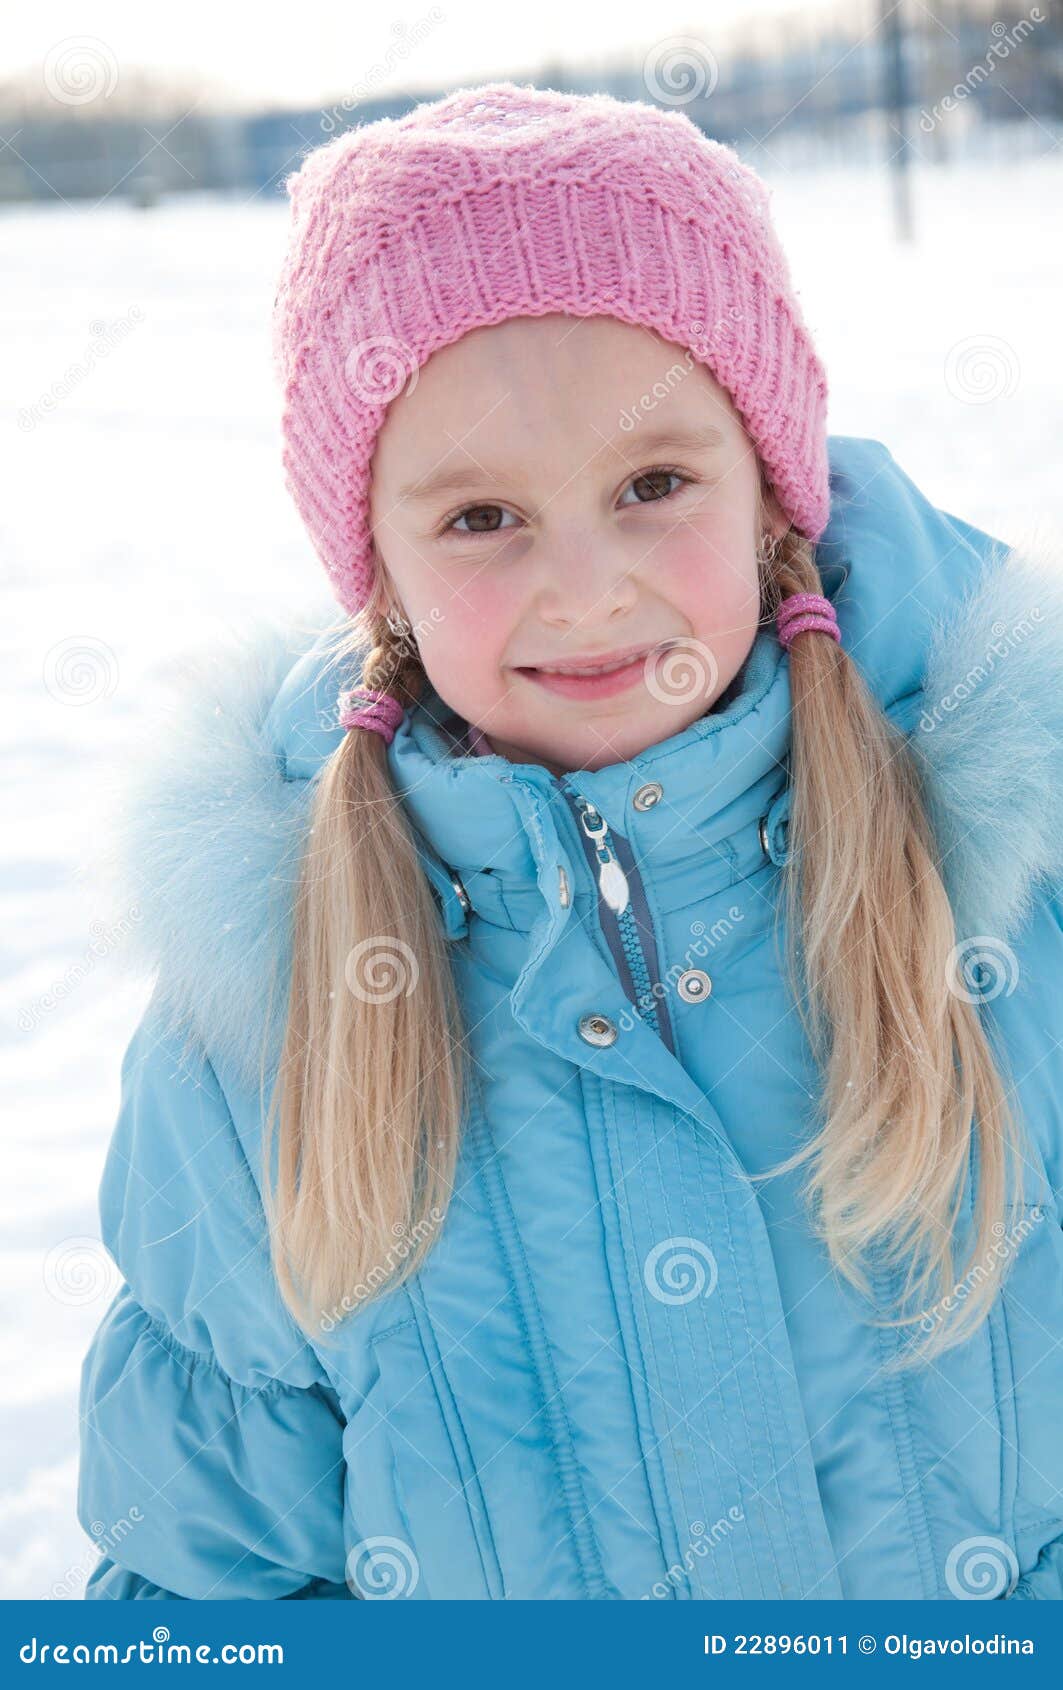 Portrait of a Girl in Winter Clothes Stock Image - Image of long ...